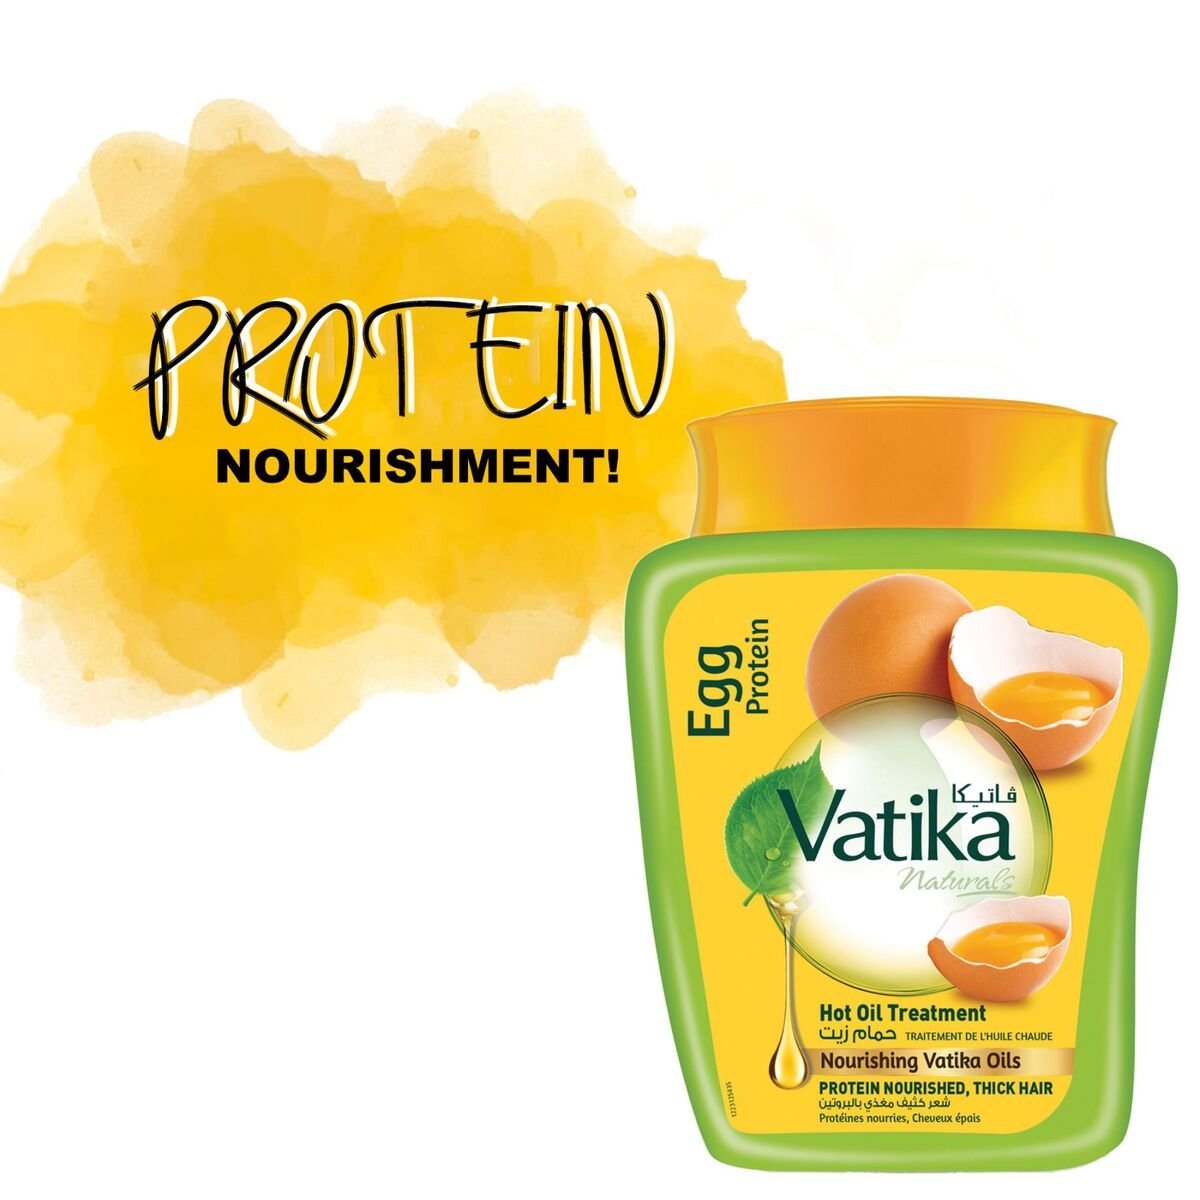 Vatika Naturals Hammam Zaith Hot Oil Treatment Enriched With Egg Protein For Nourished & Thick Hair 1 kg